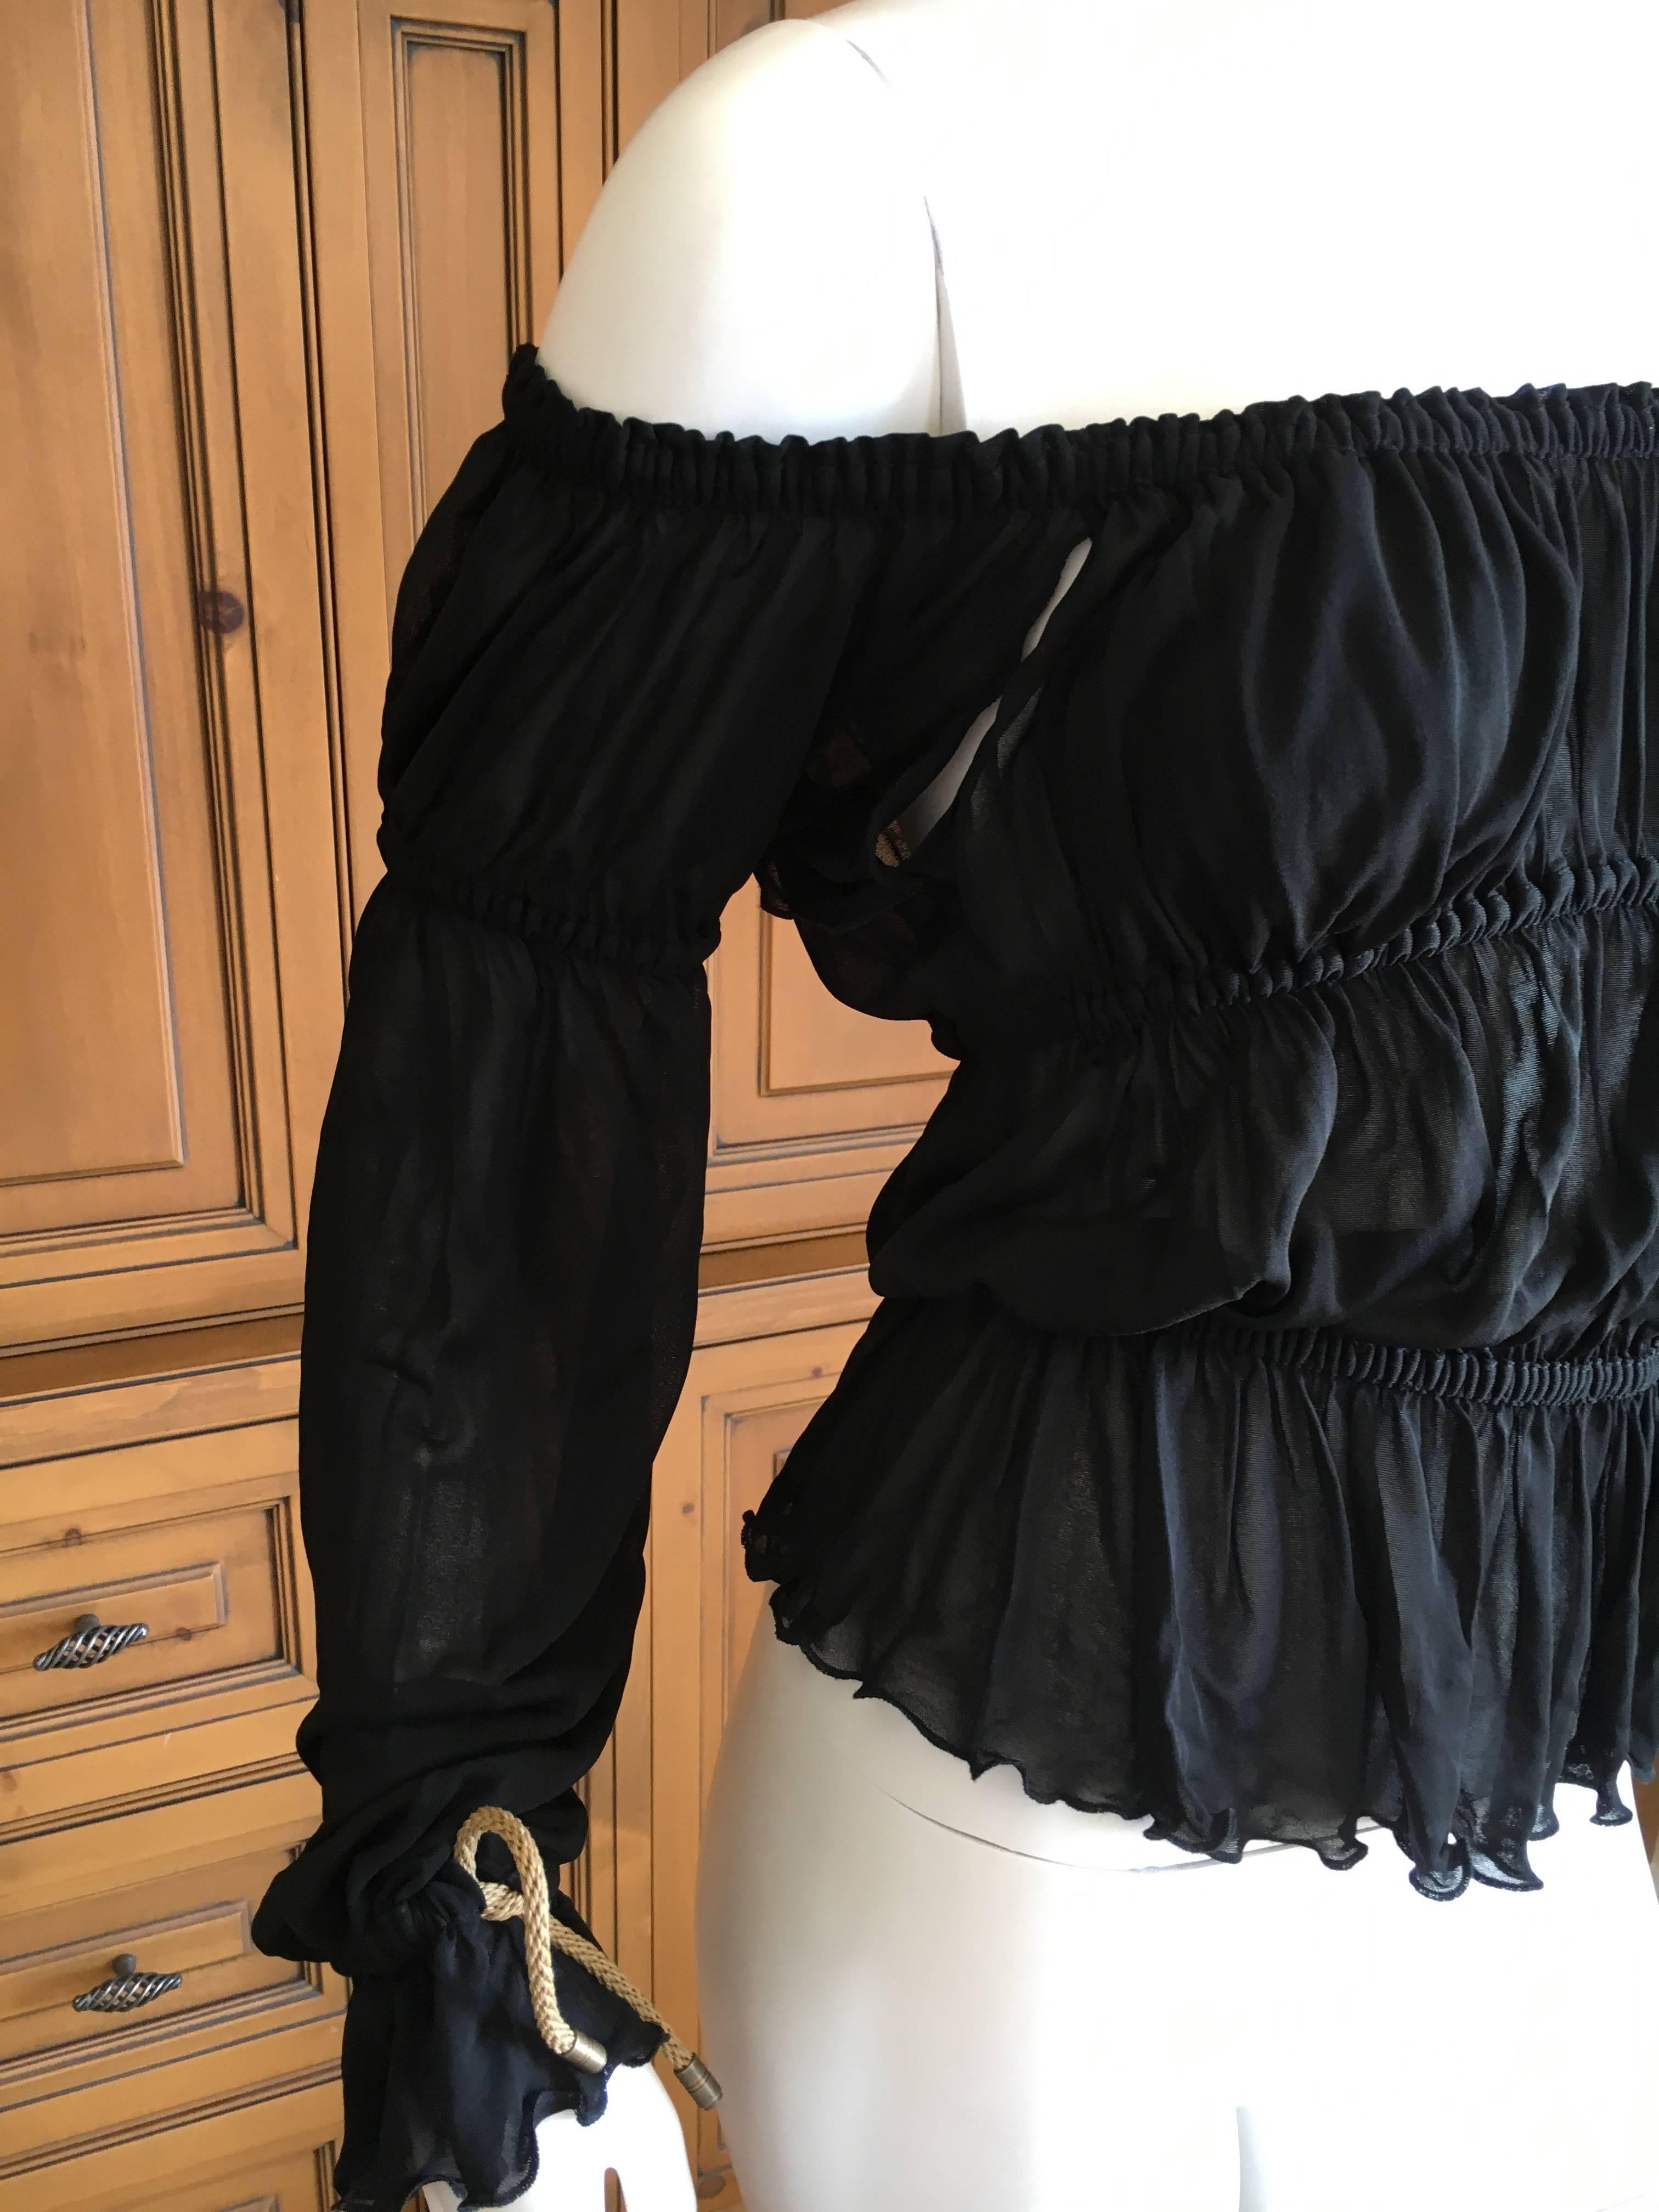 Yves Saint Laurent by Tom Ford Romantic Black Top In Excellent Condition For Sale In Cloverdale, CA